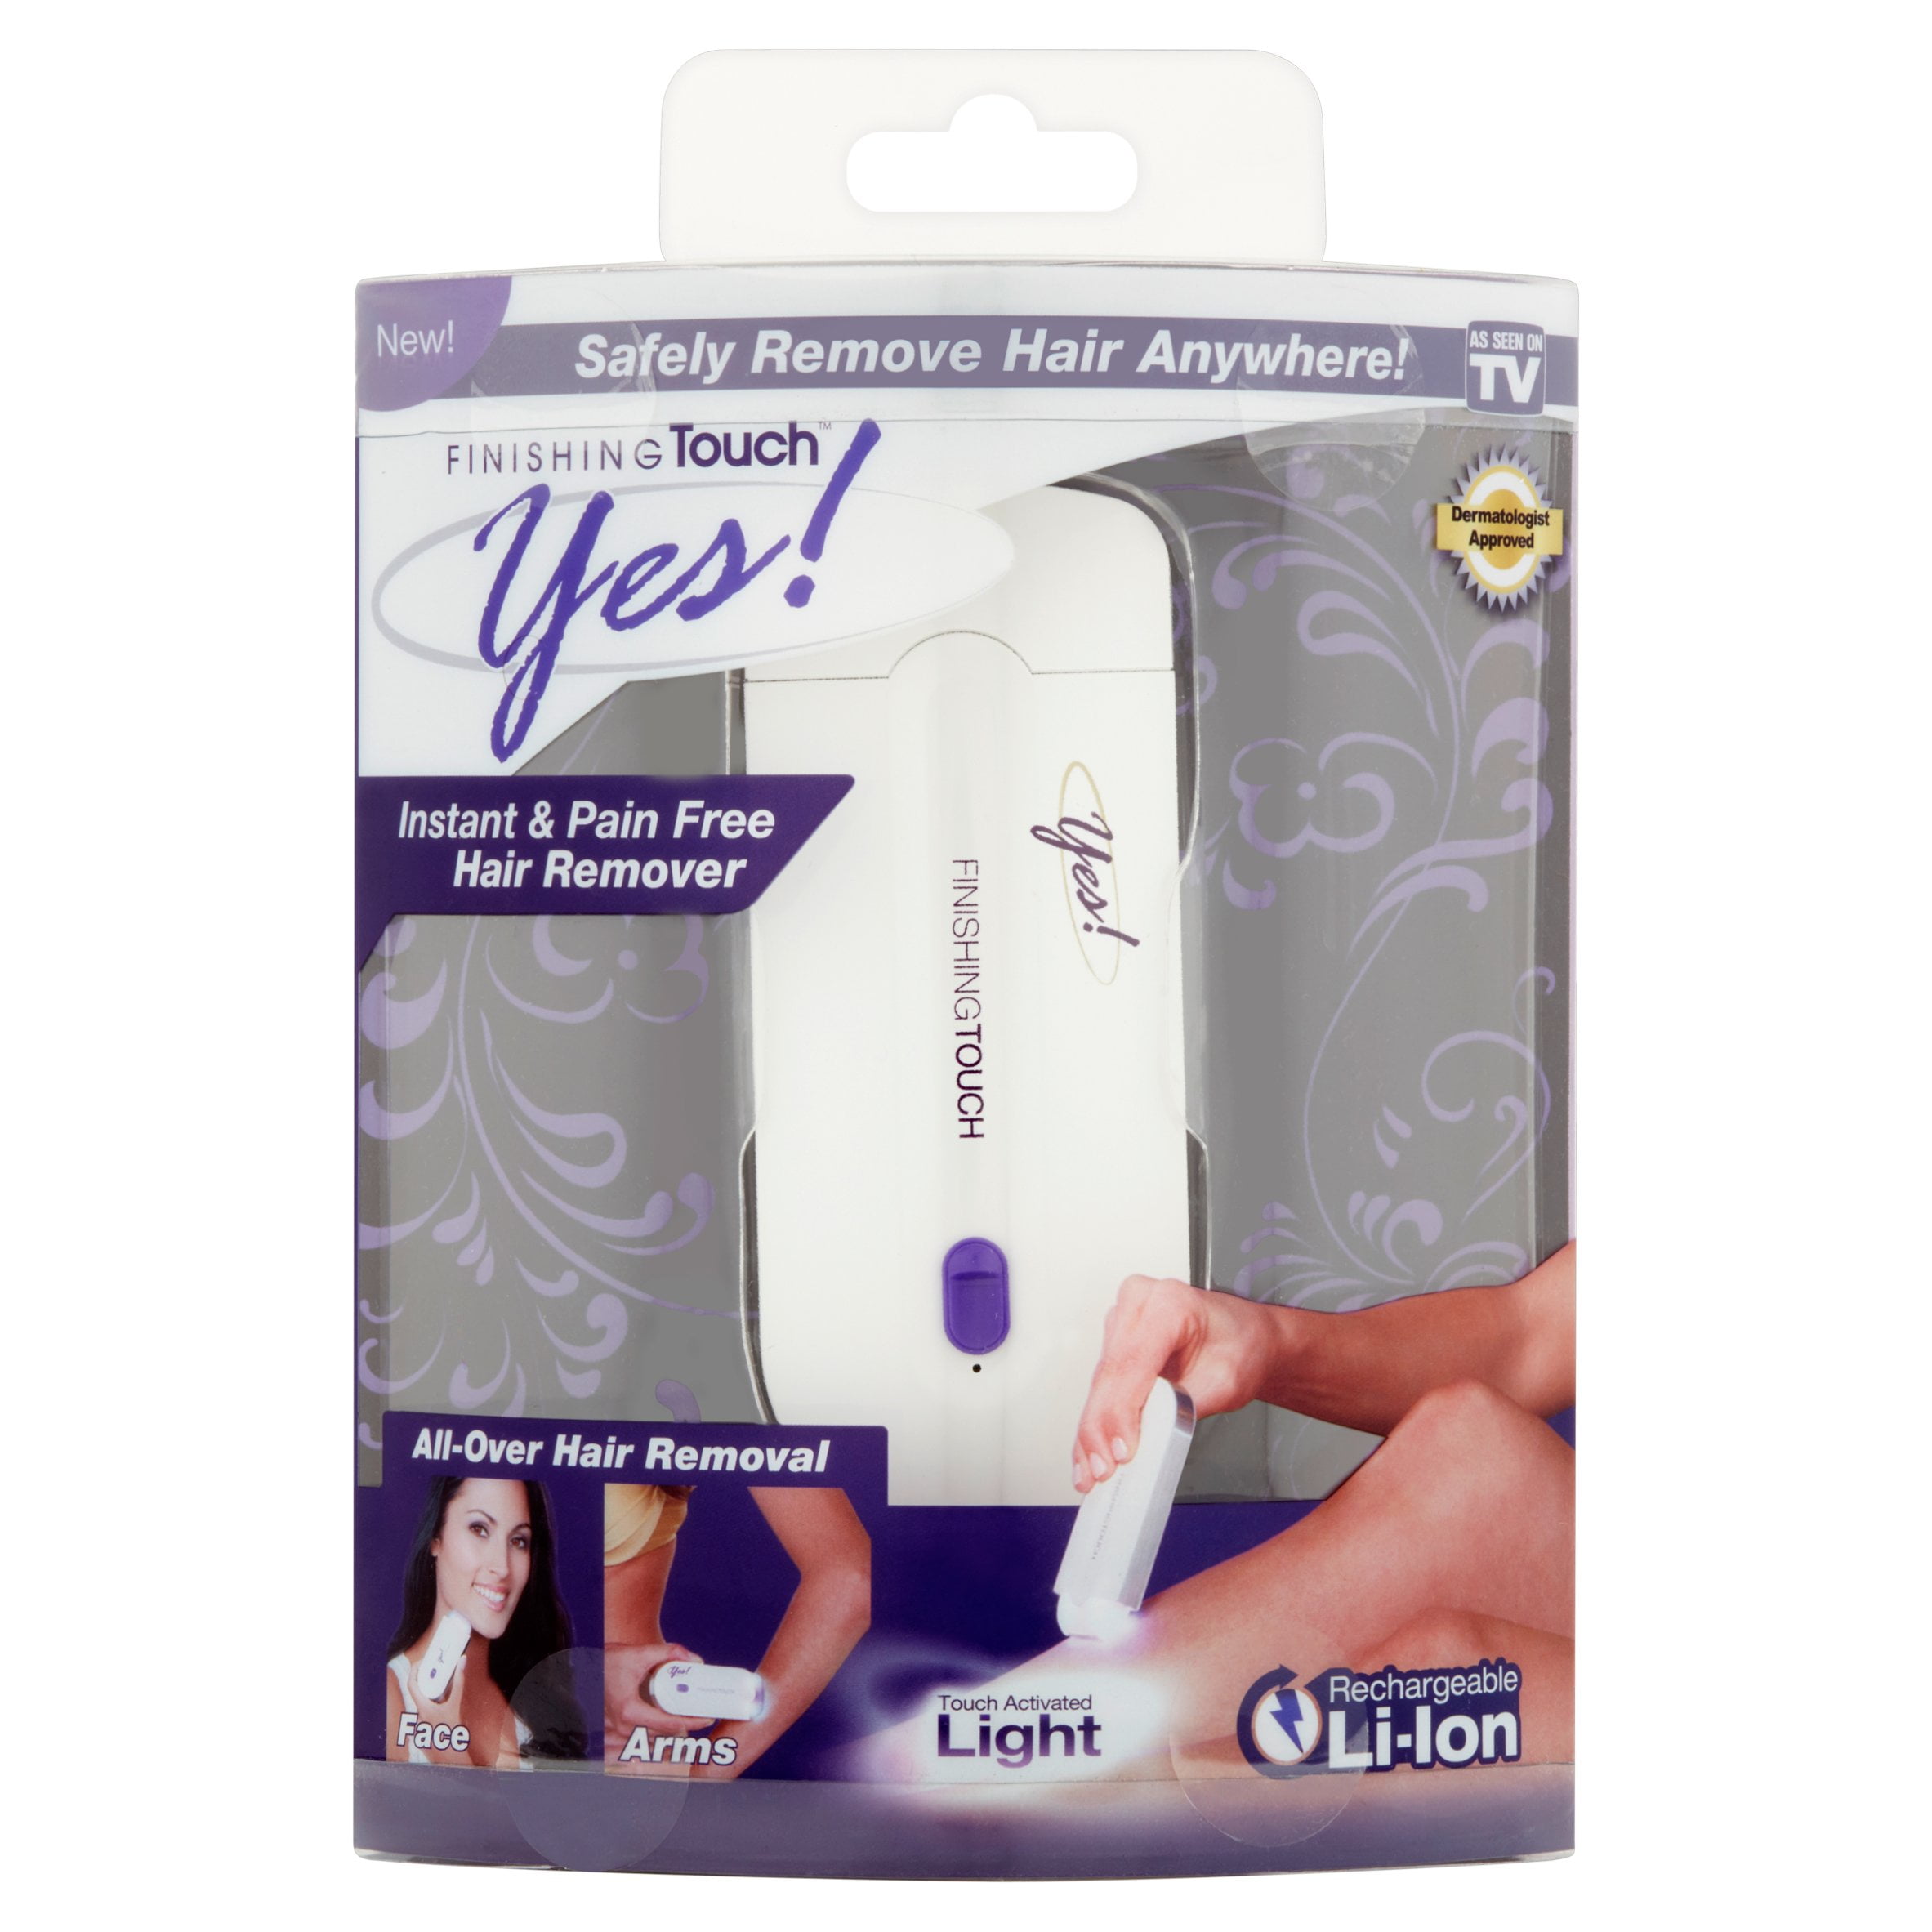 As Seen On TV Finishing Touch Yes Personal Hair Remover Walmartcom